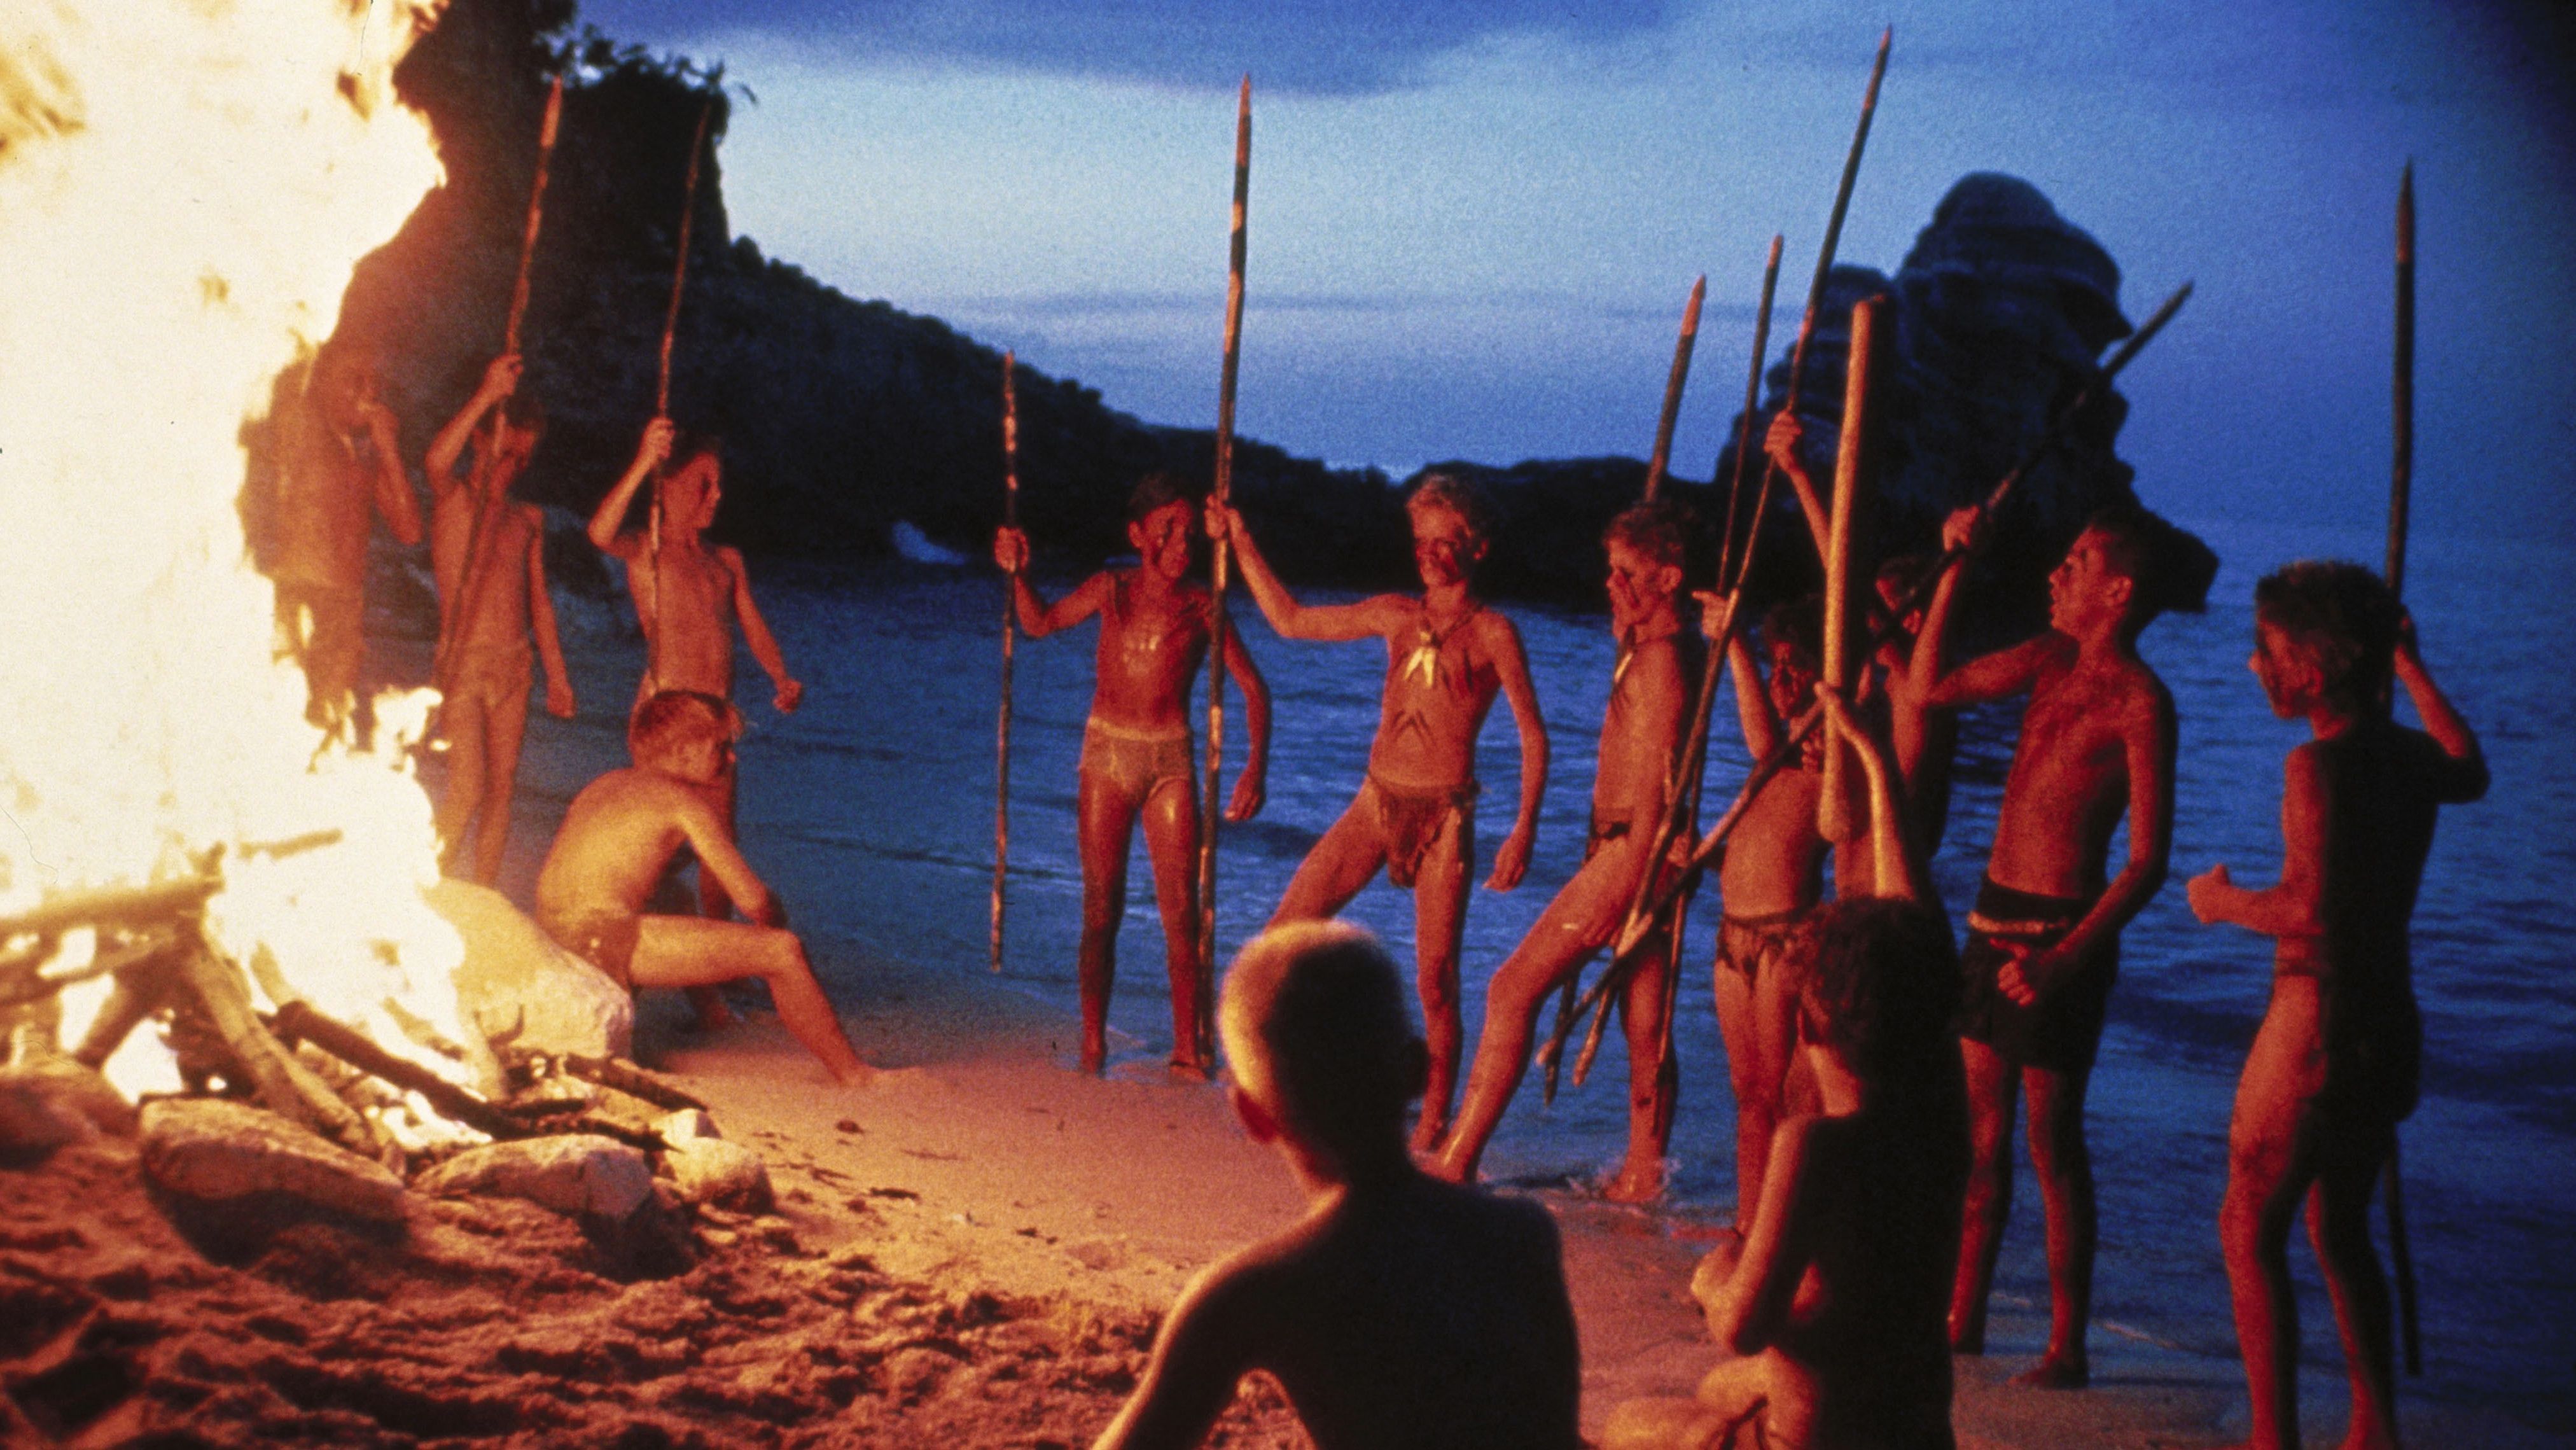 William Golding's novel "Lord of the Flies" has been adapted into a film in 1963 and 1990. 